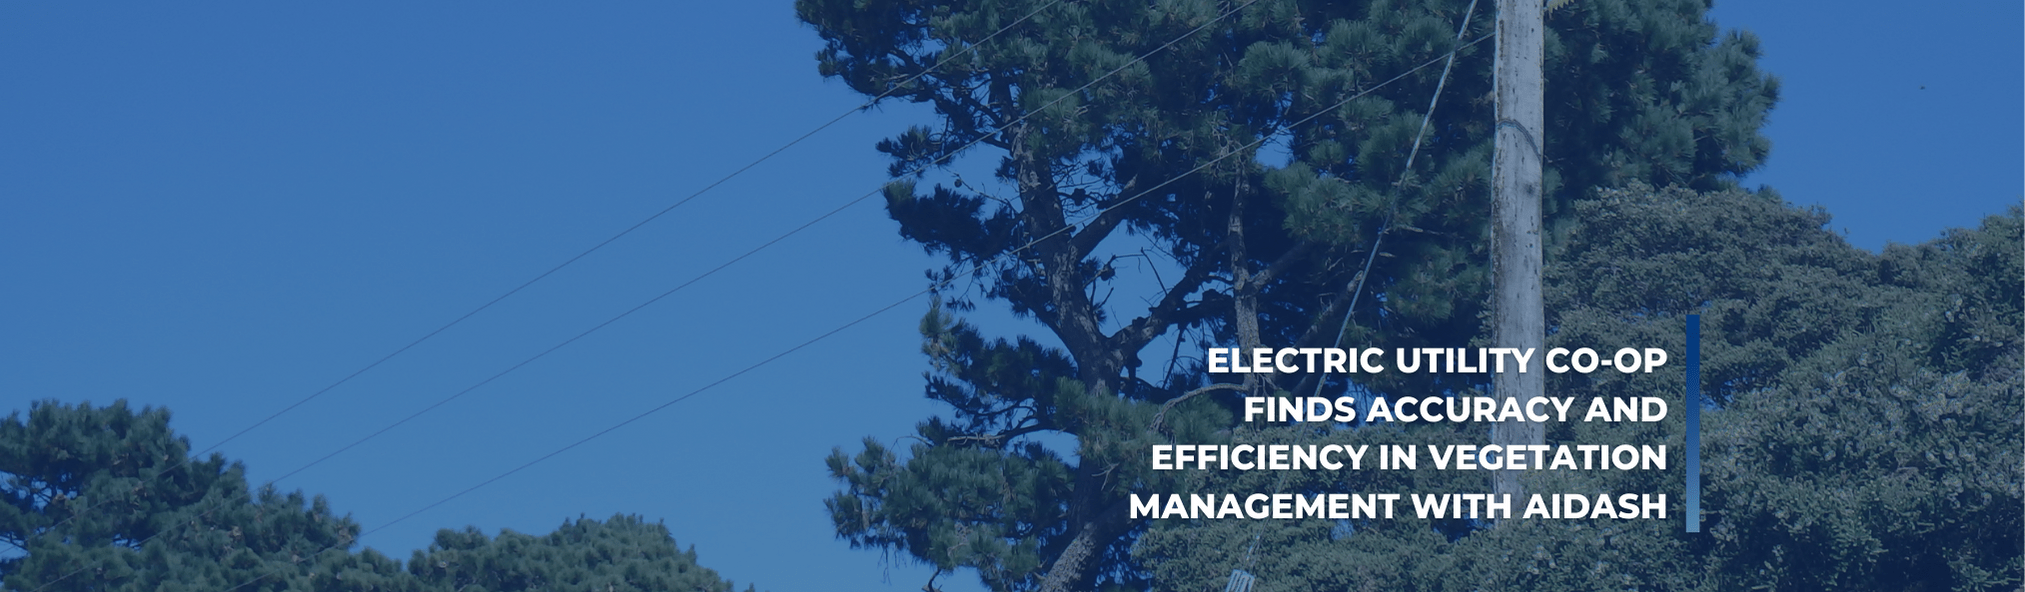 Electric Utility Co-op Finds Accuracy and Efficiency In Vegetation Management With AiDash